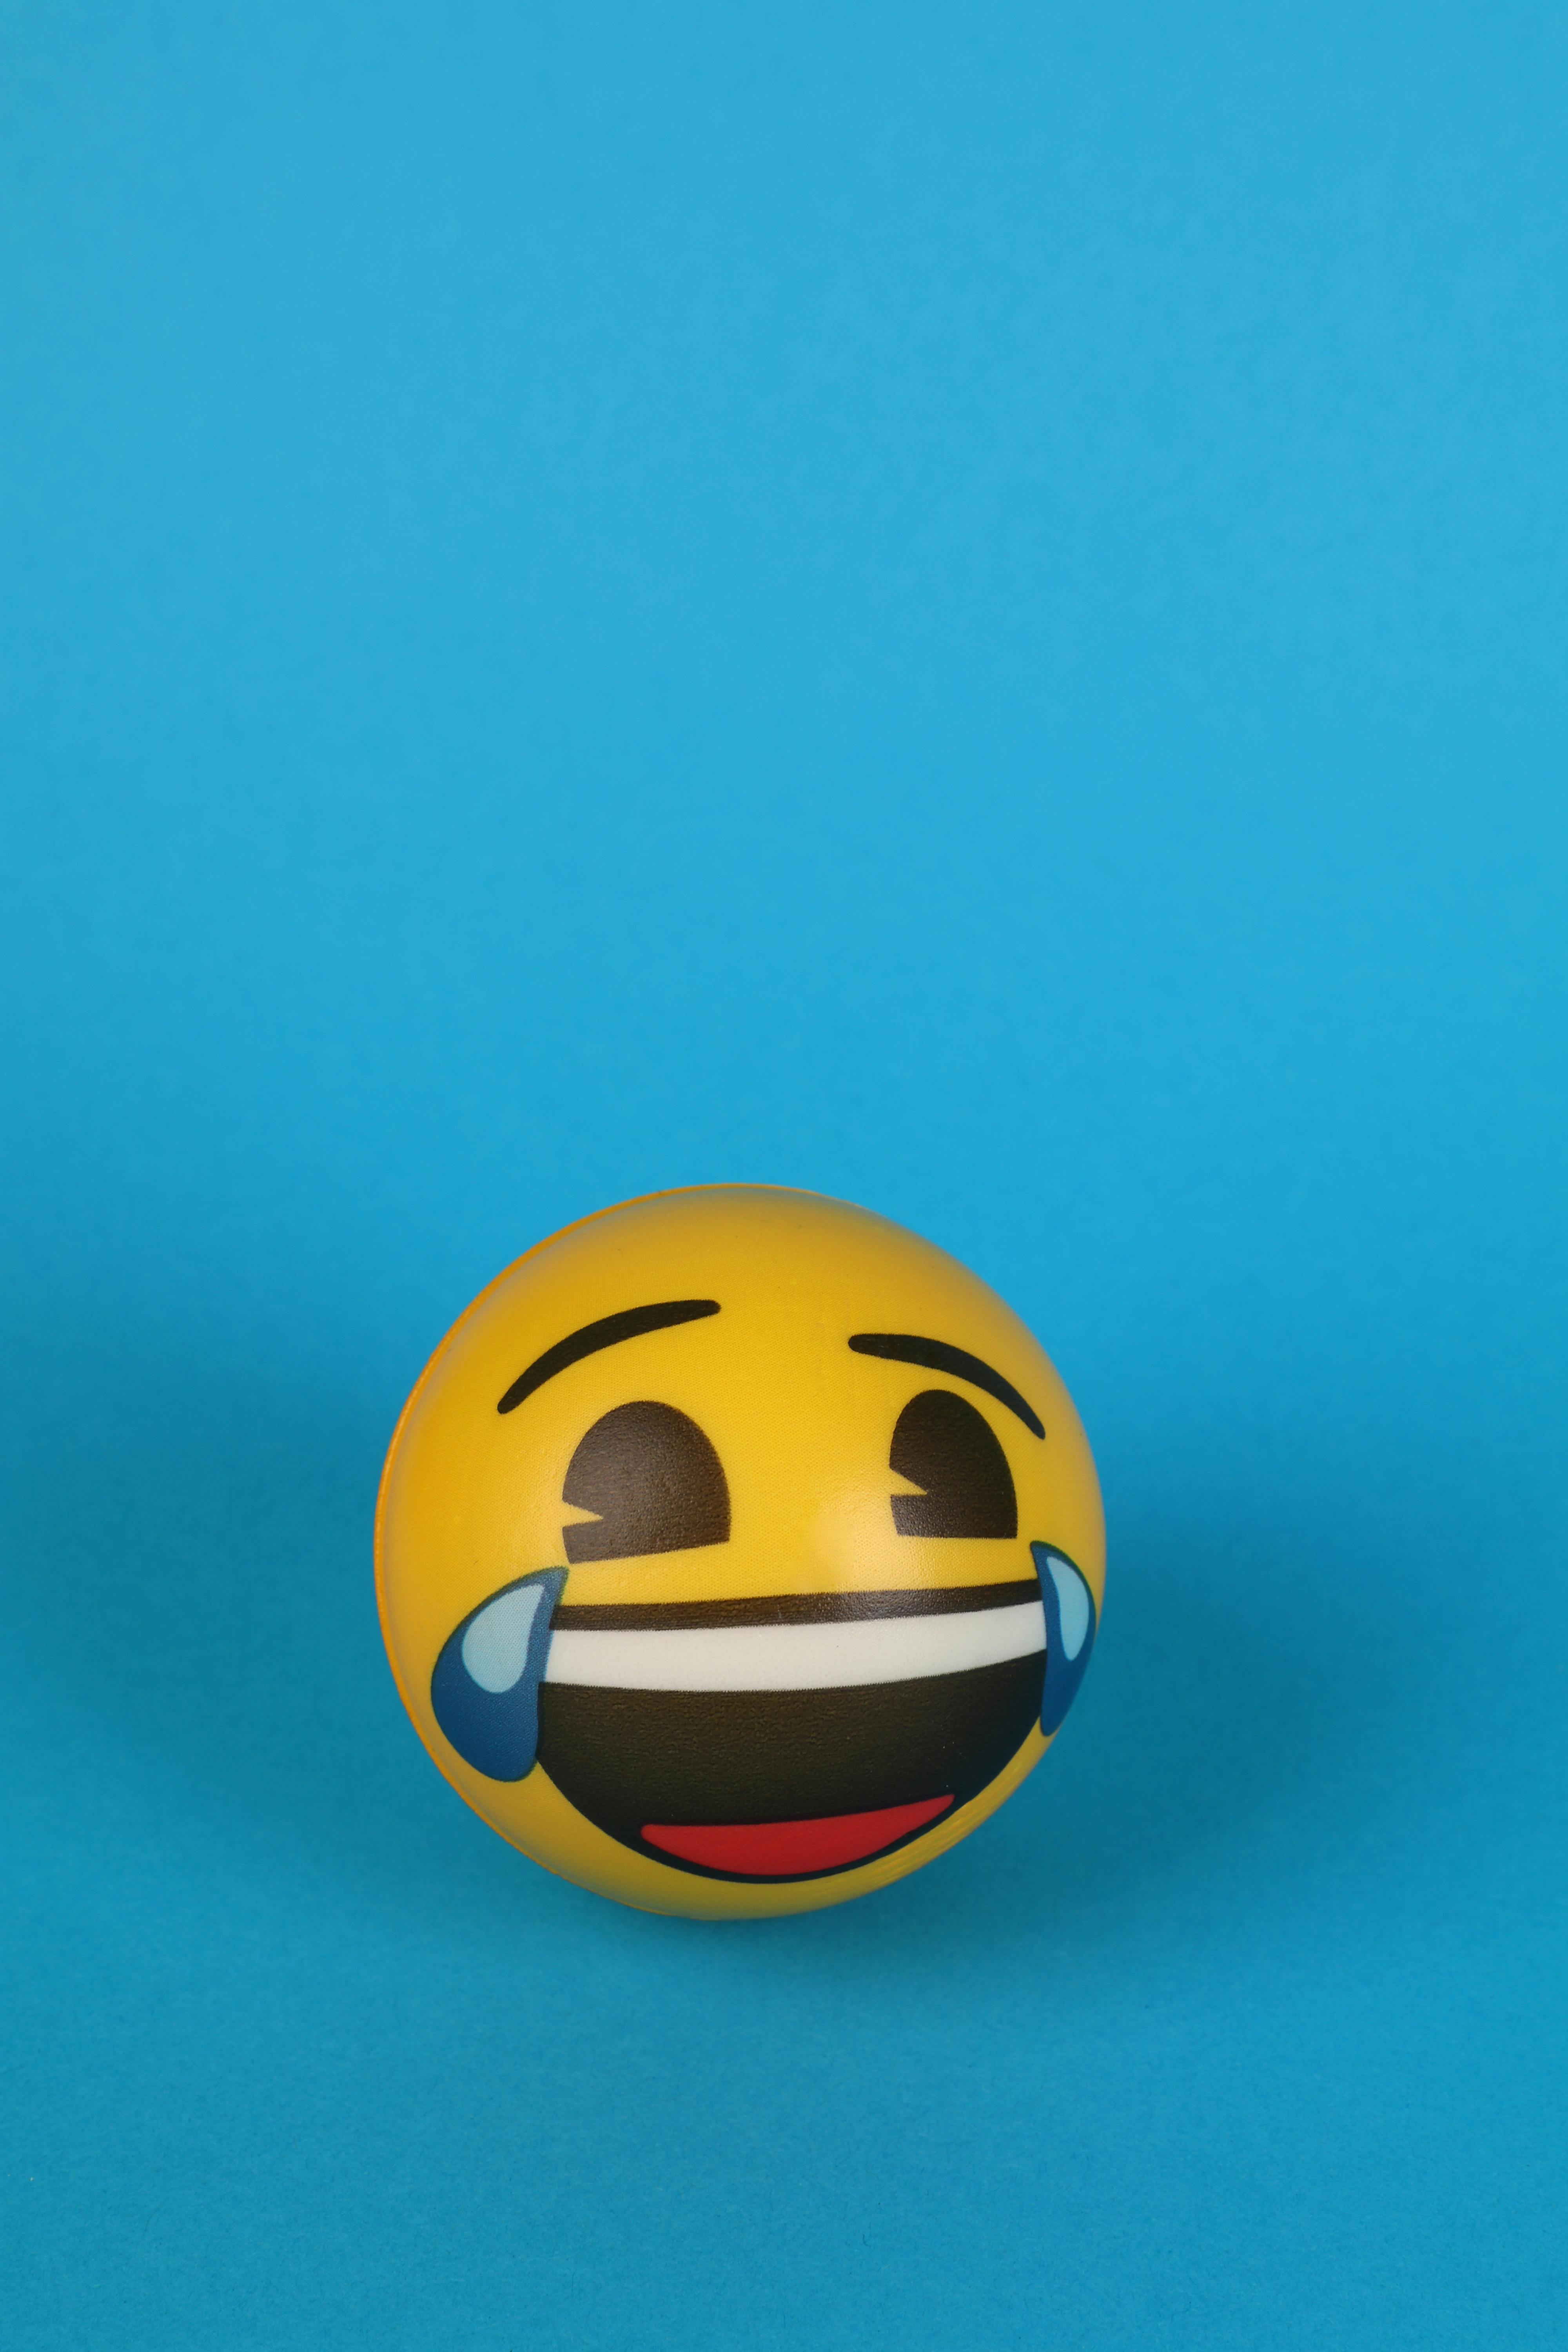 A Laughing Emoji with tears over Blue Surface · Free Stock Photo